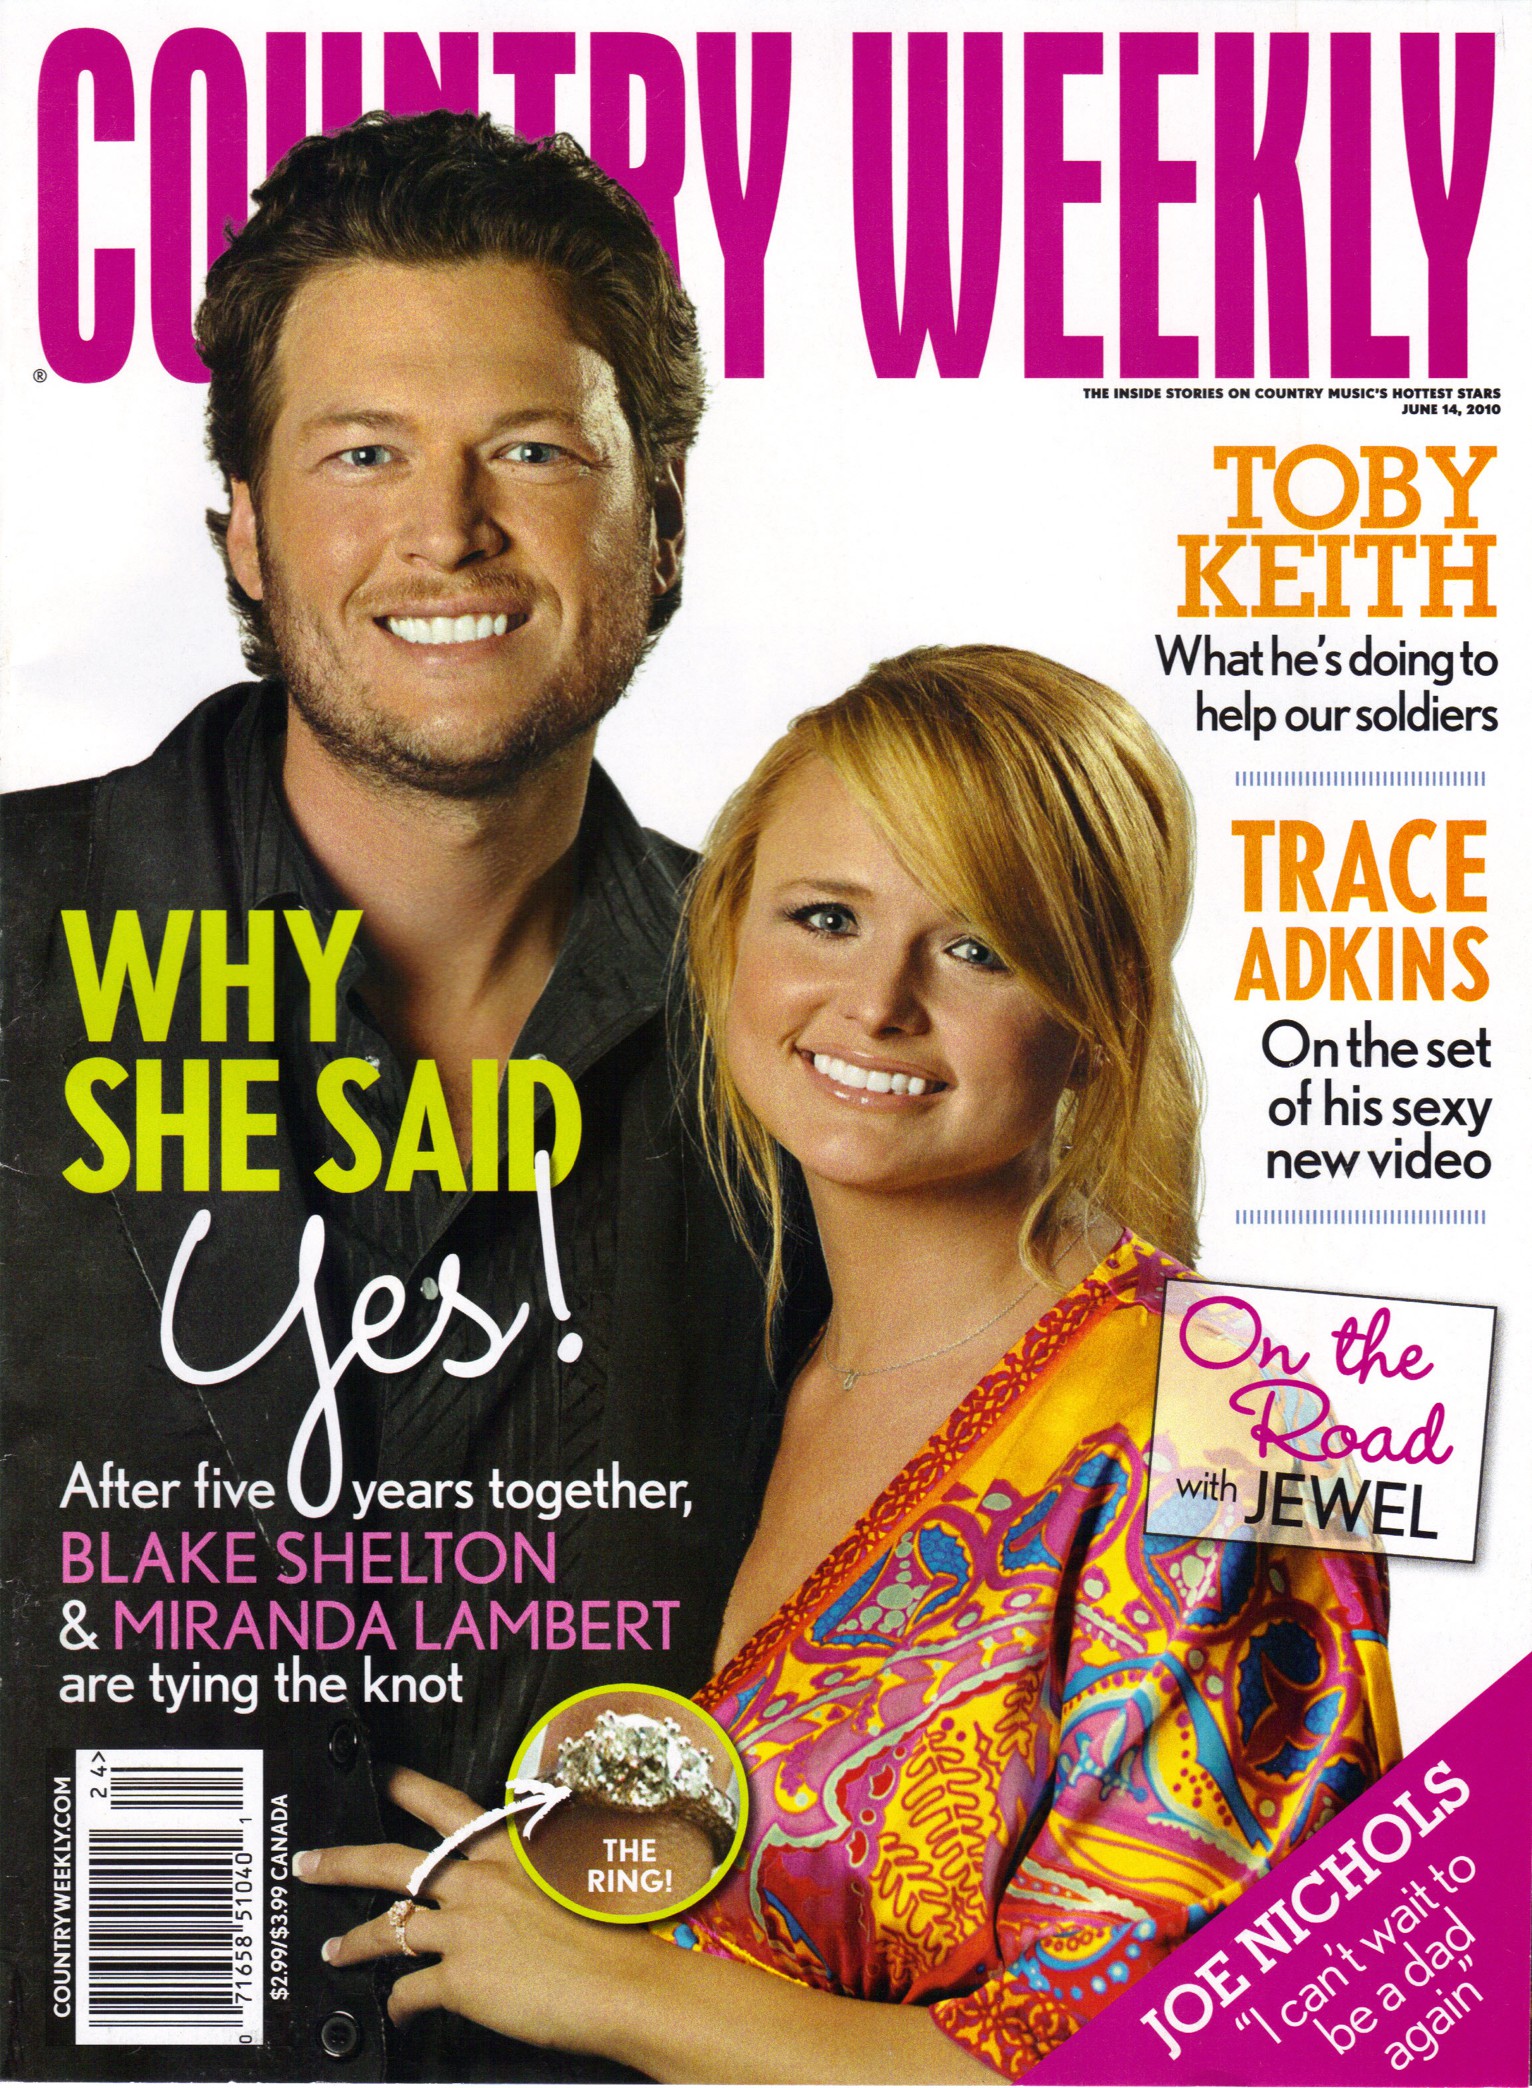 Country Weekly - June 14th 2010